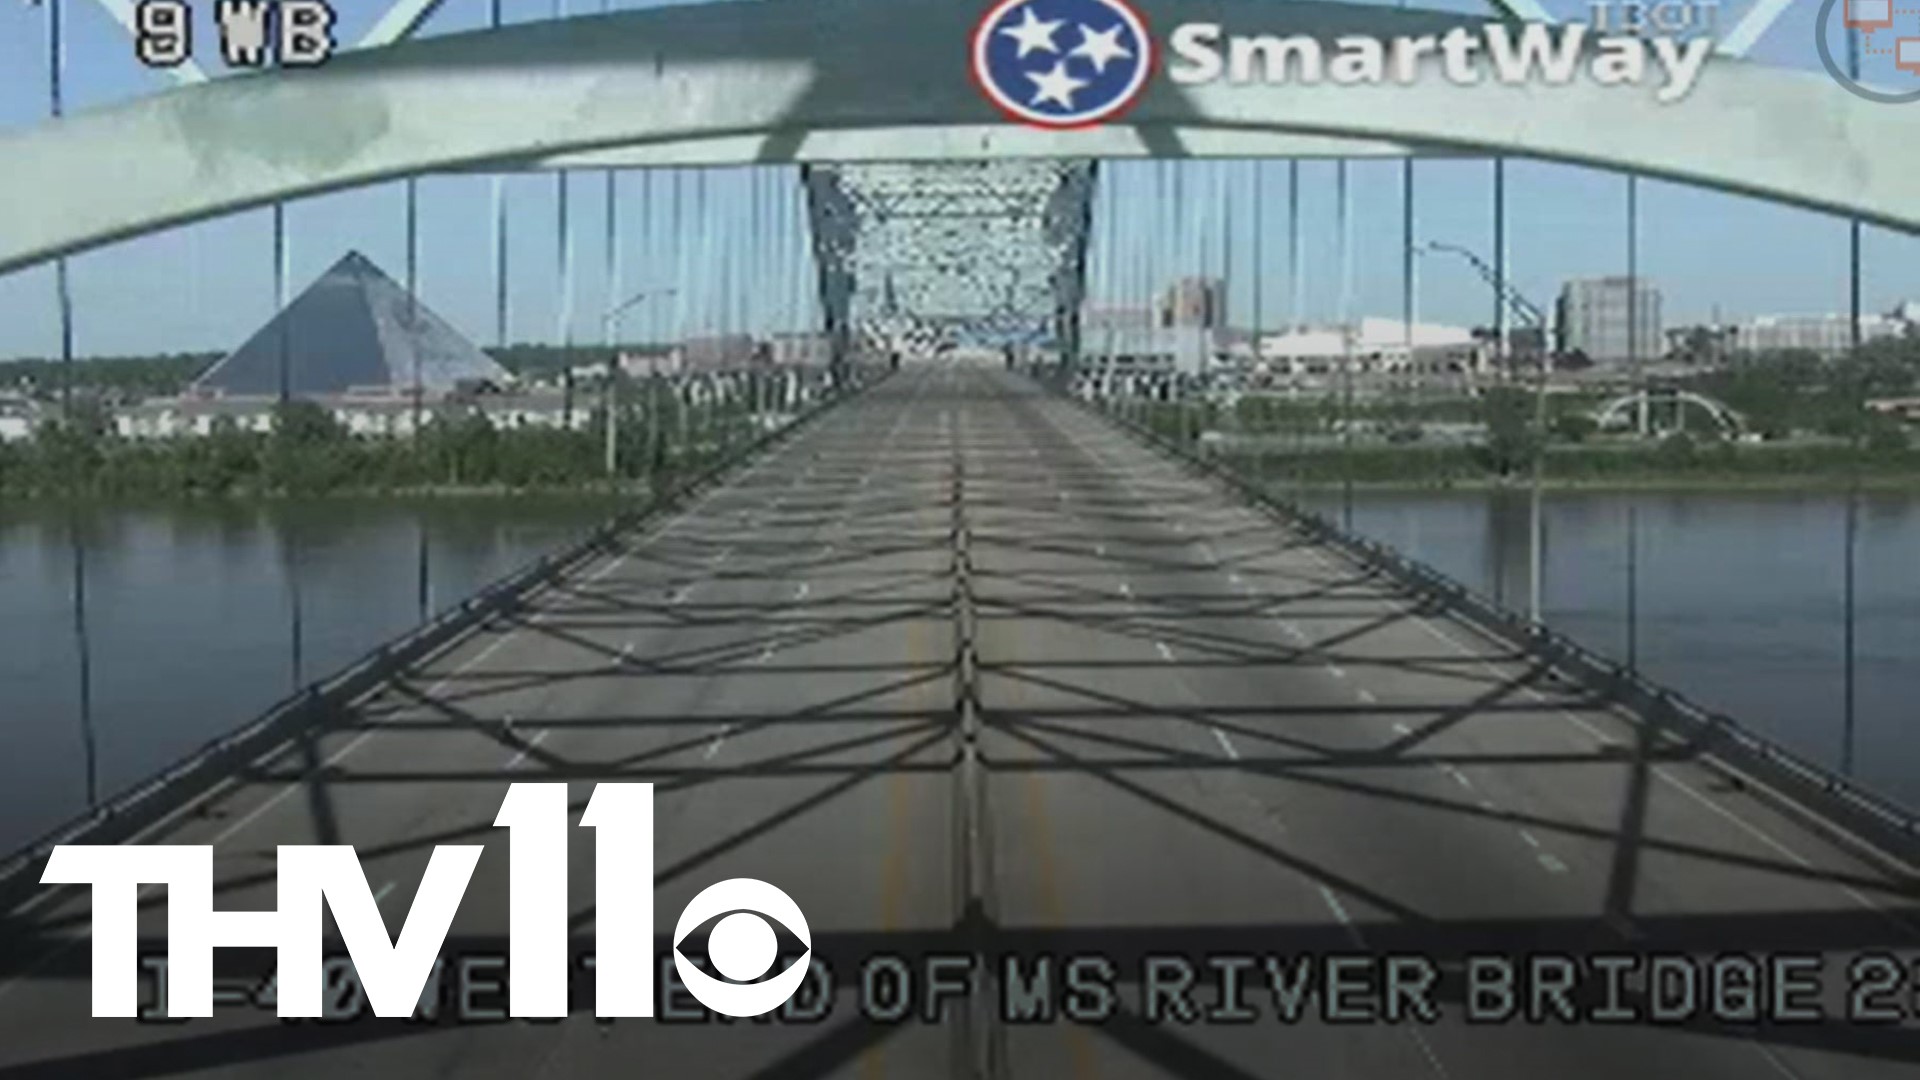 The I-40 bridge was inspected this week, revealing a fracture in it. Back in 2019, a drone camera was used to inspect cables and now shows early signs of the crack.